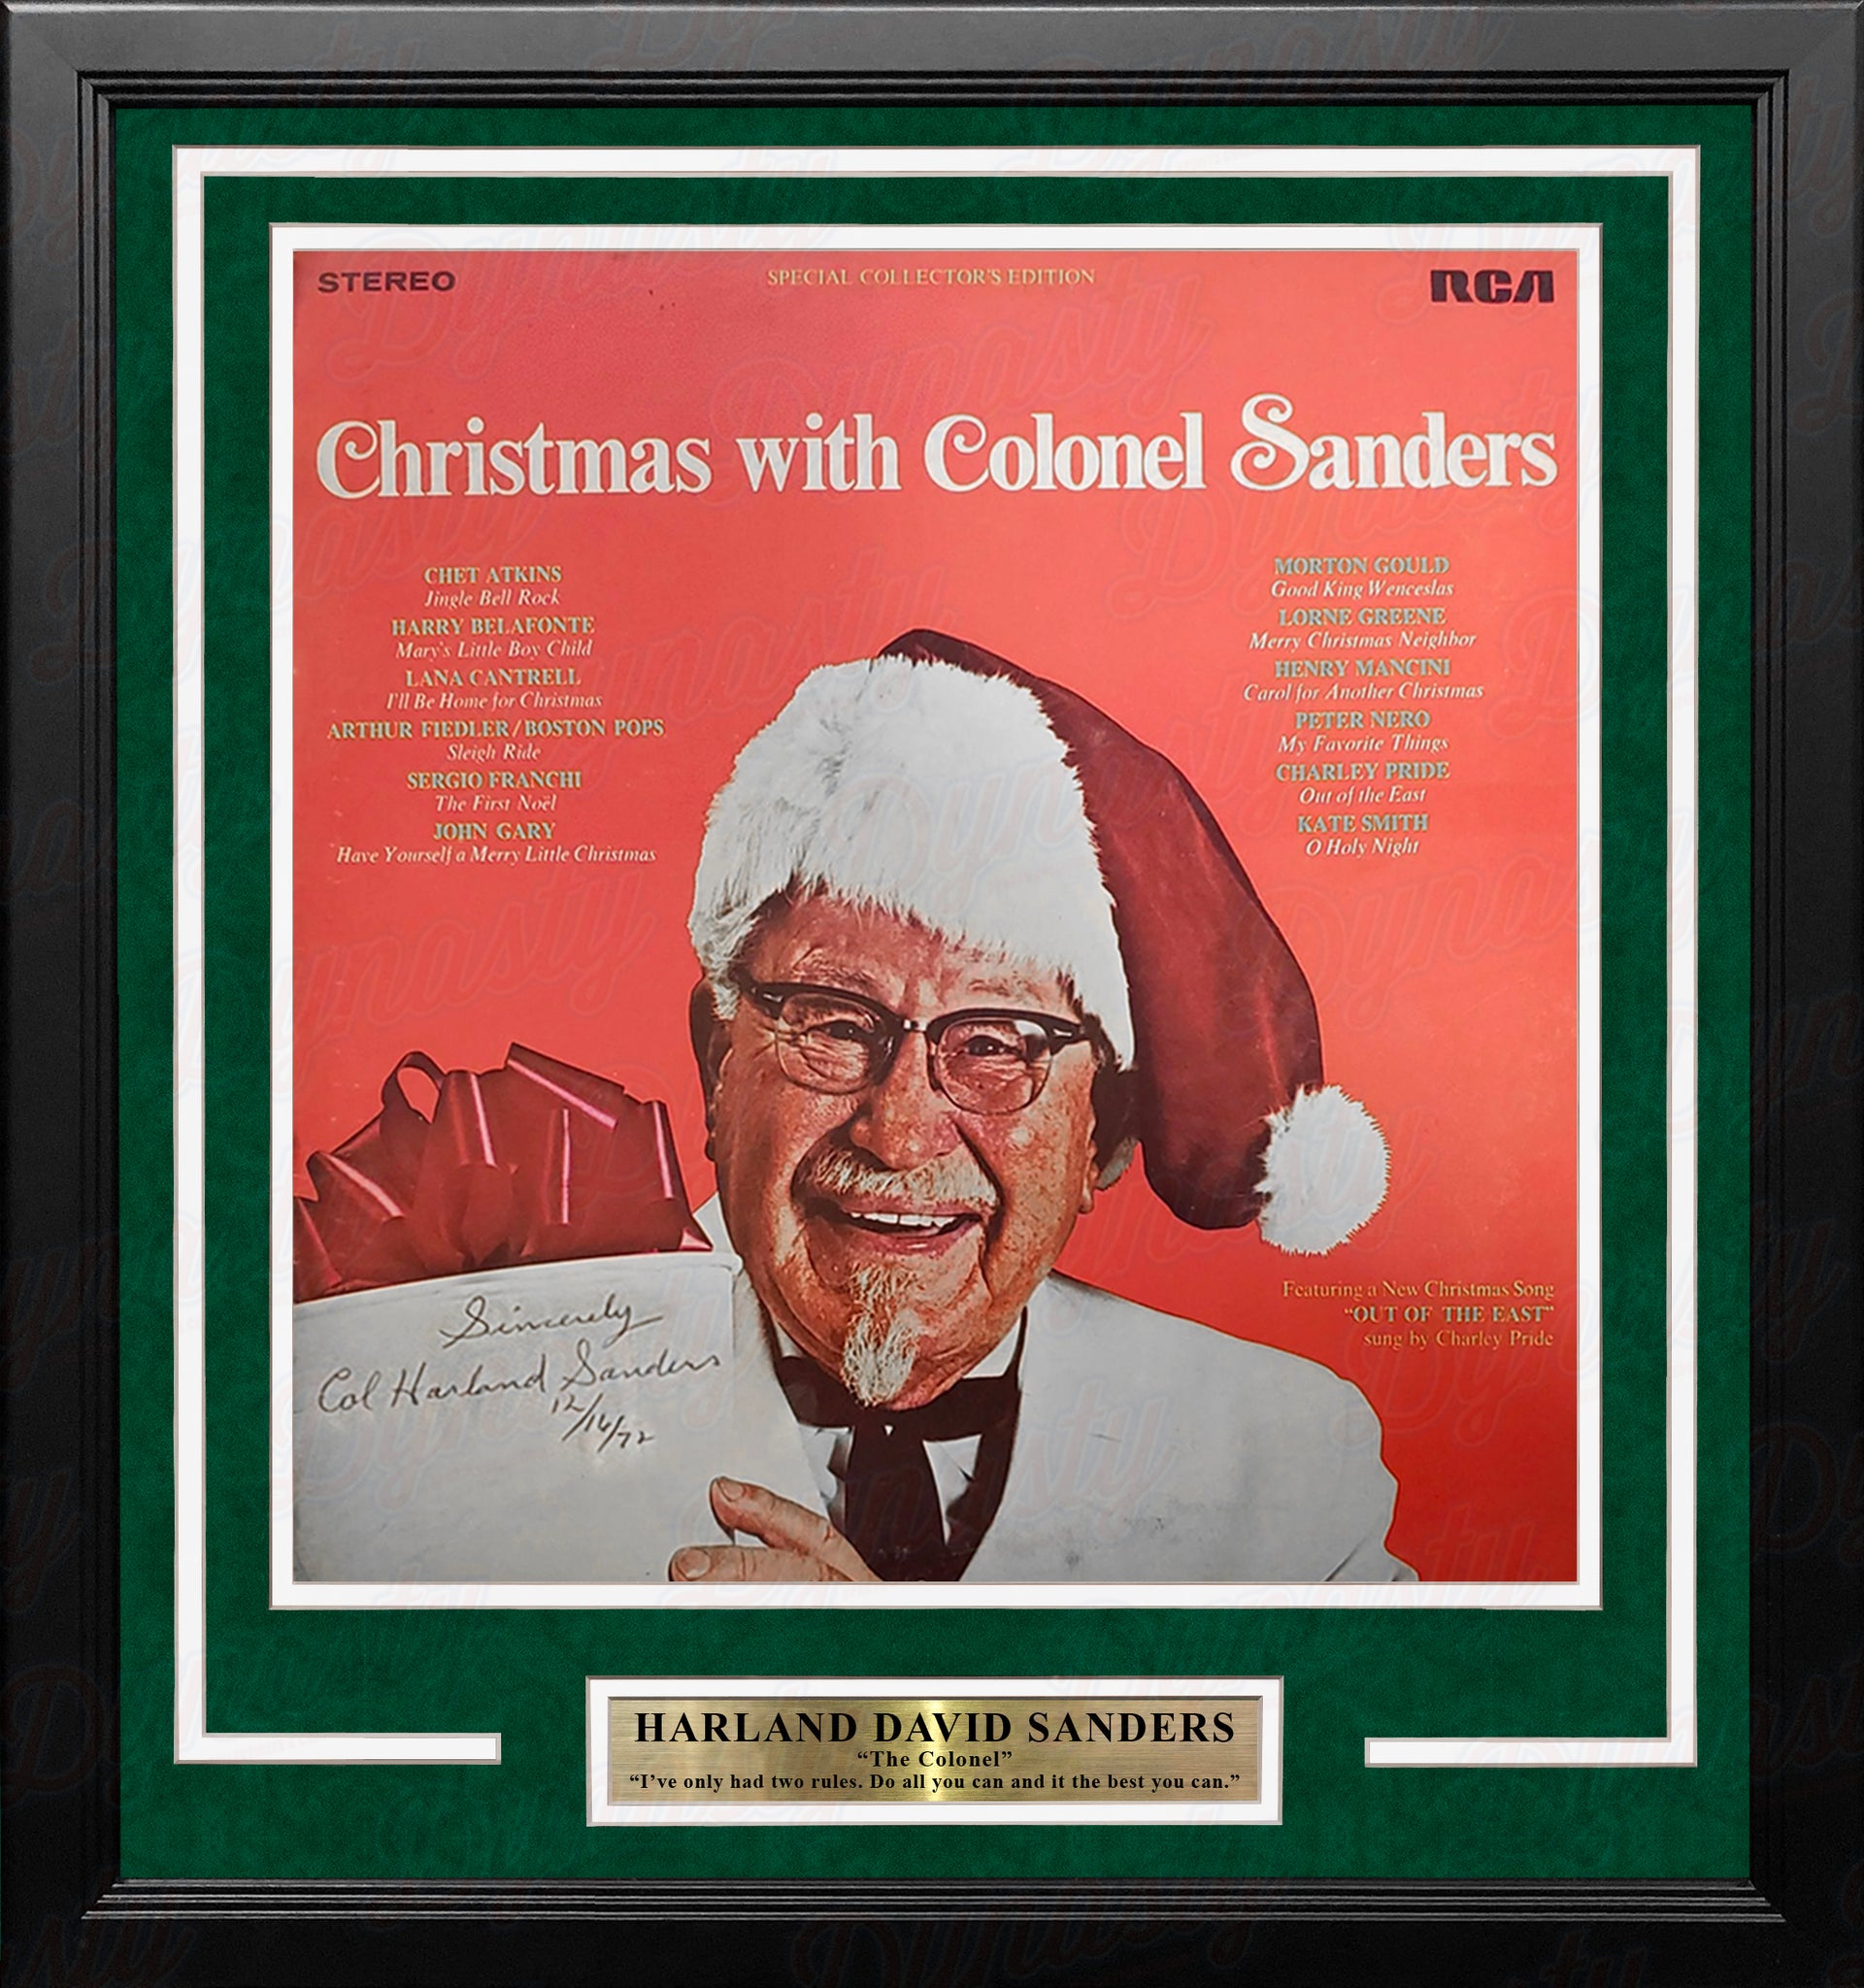 Colonel Harland David Sanders Kentucky Fried Chicken Autographed Framed Album - Dynasty Sports & Framing 